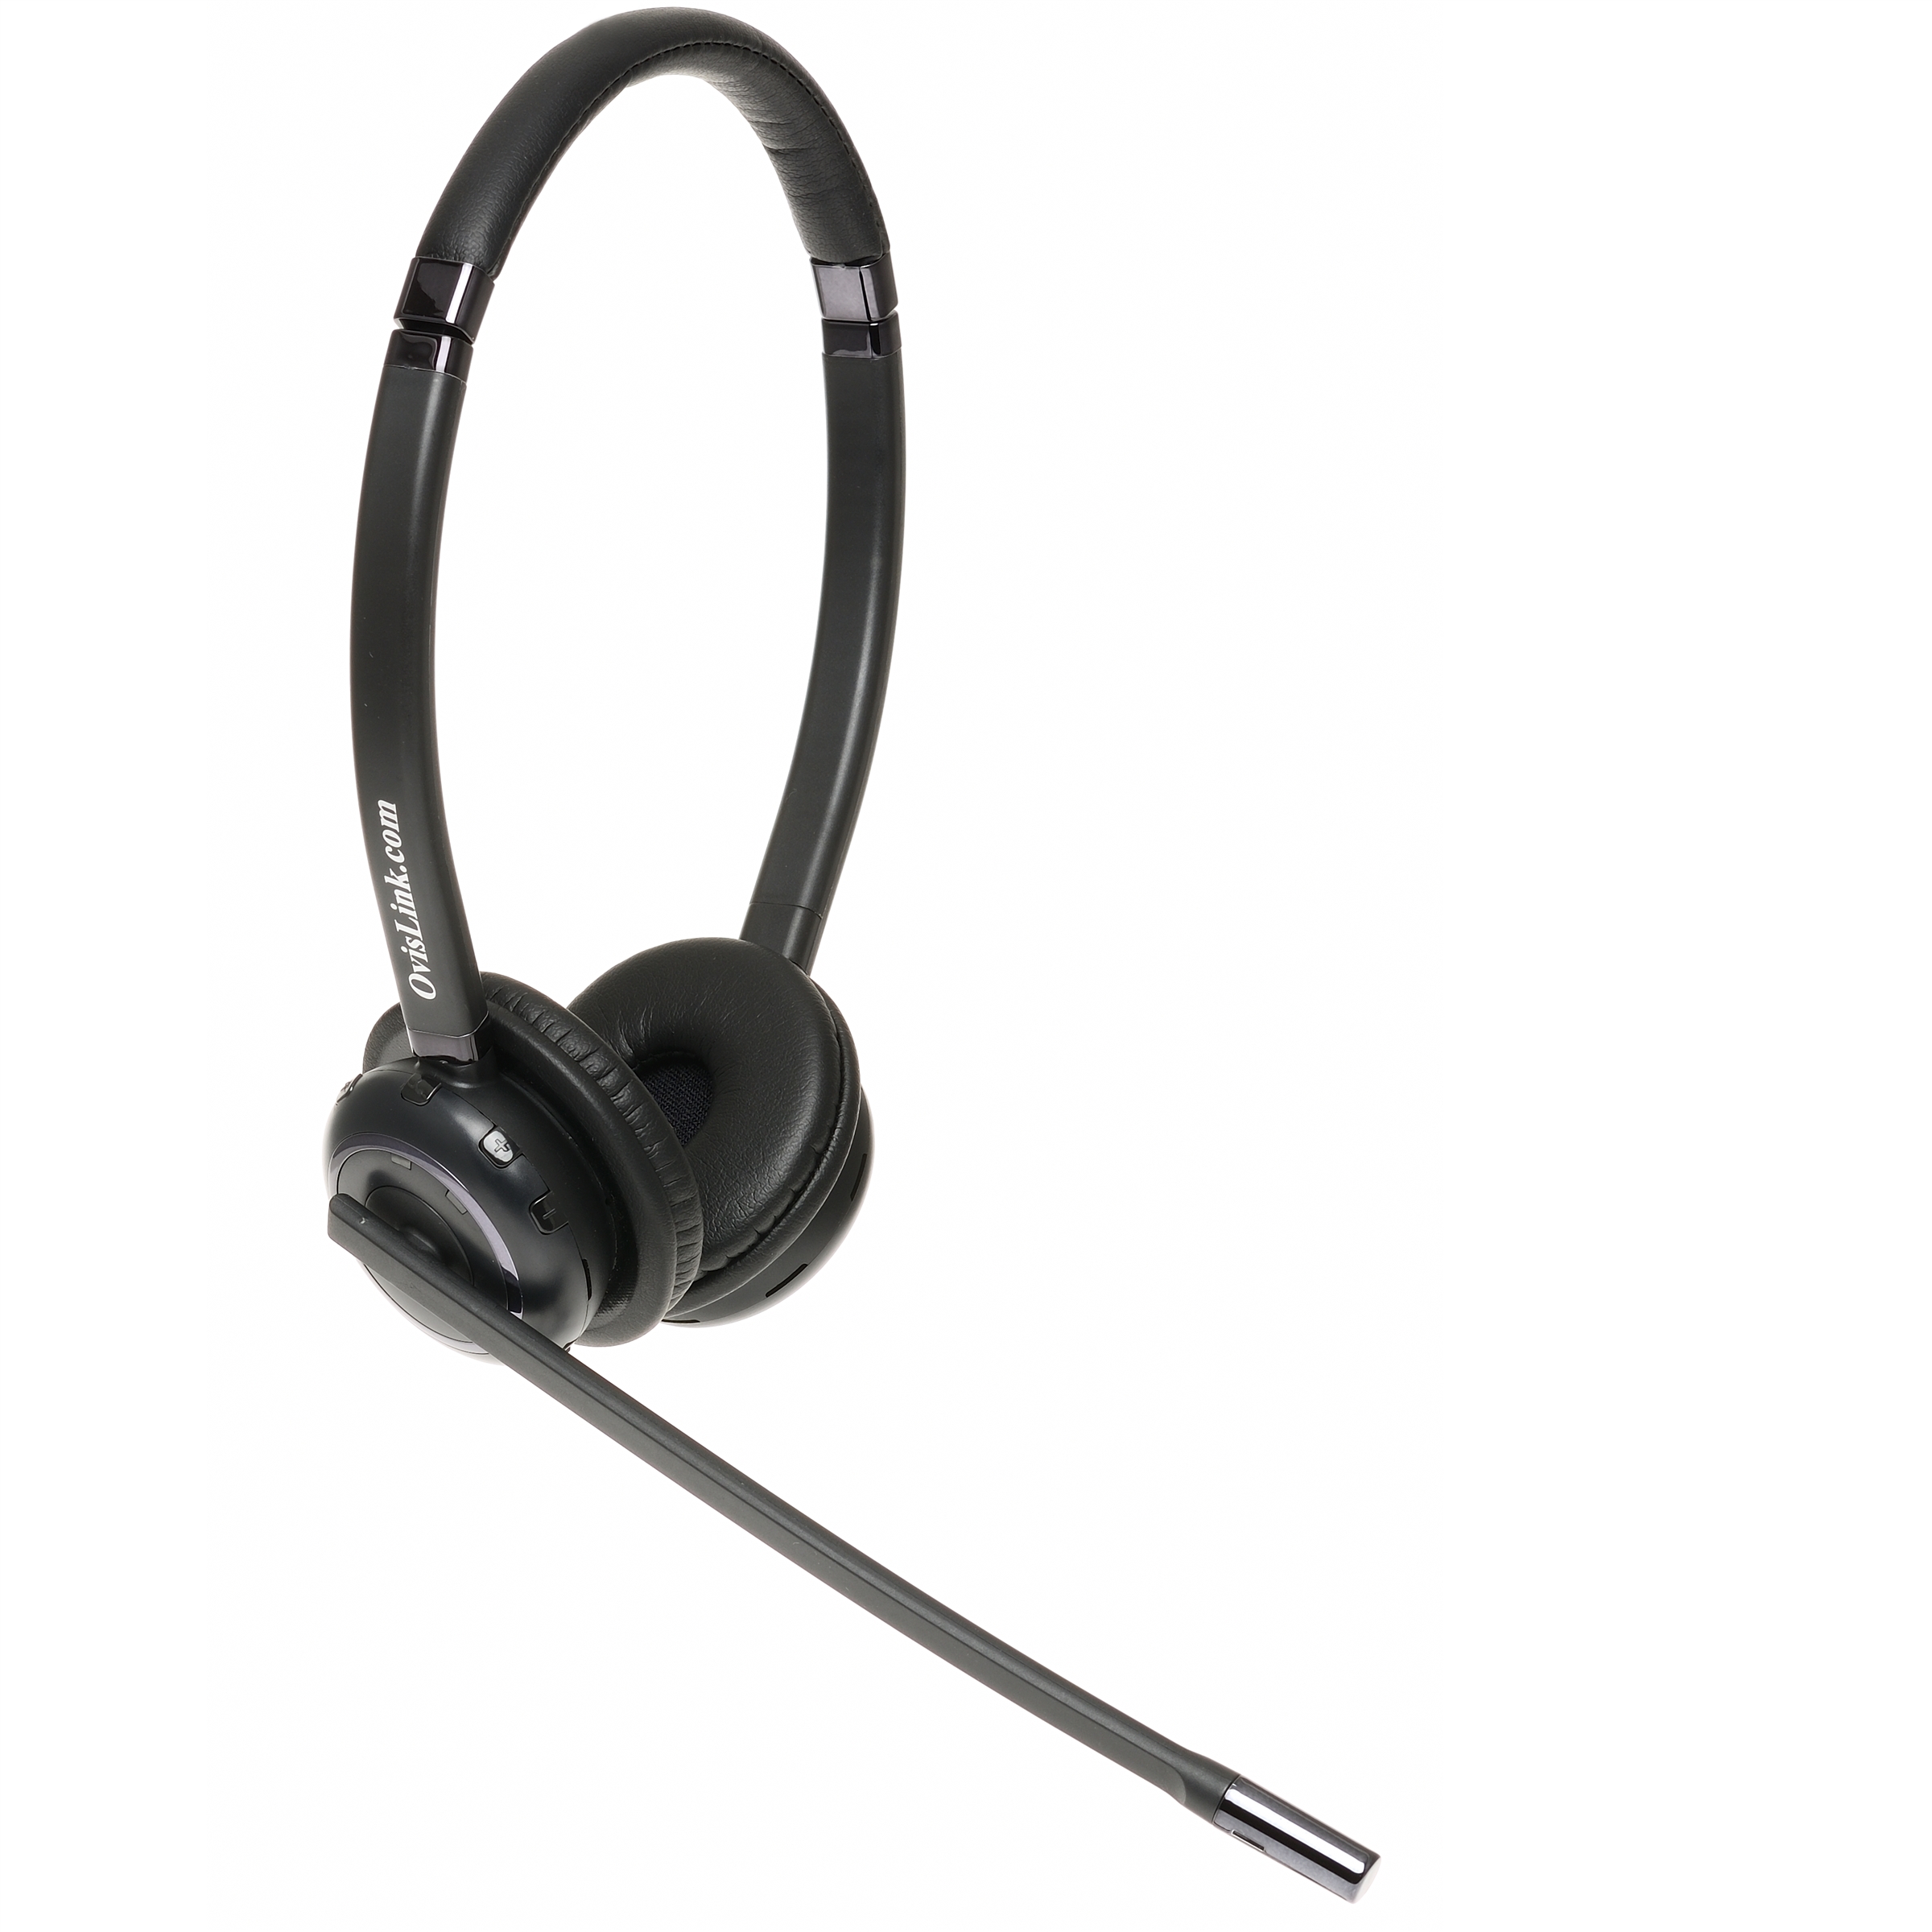 Wireless Call Center headset for work. Compatible with Computers, Cell  phones, telephones: Cisco 8845, 8851, 8861, 8865, Cisco SPA 525G2, Polycom  VVX600 CCX600, Mitel 6873, 6940 Grandstream, Yealink phone and Microsoft  Teams, Skype, Google Meet, Zoom